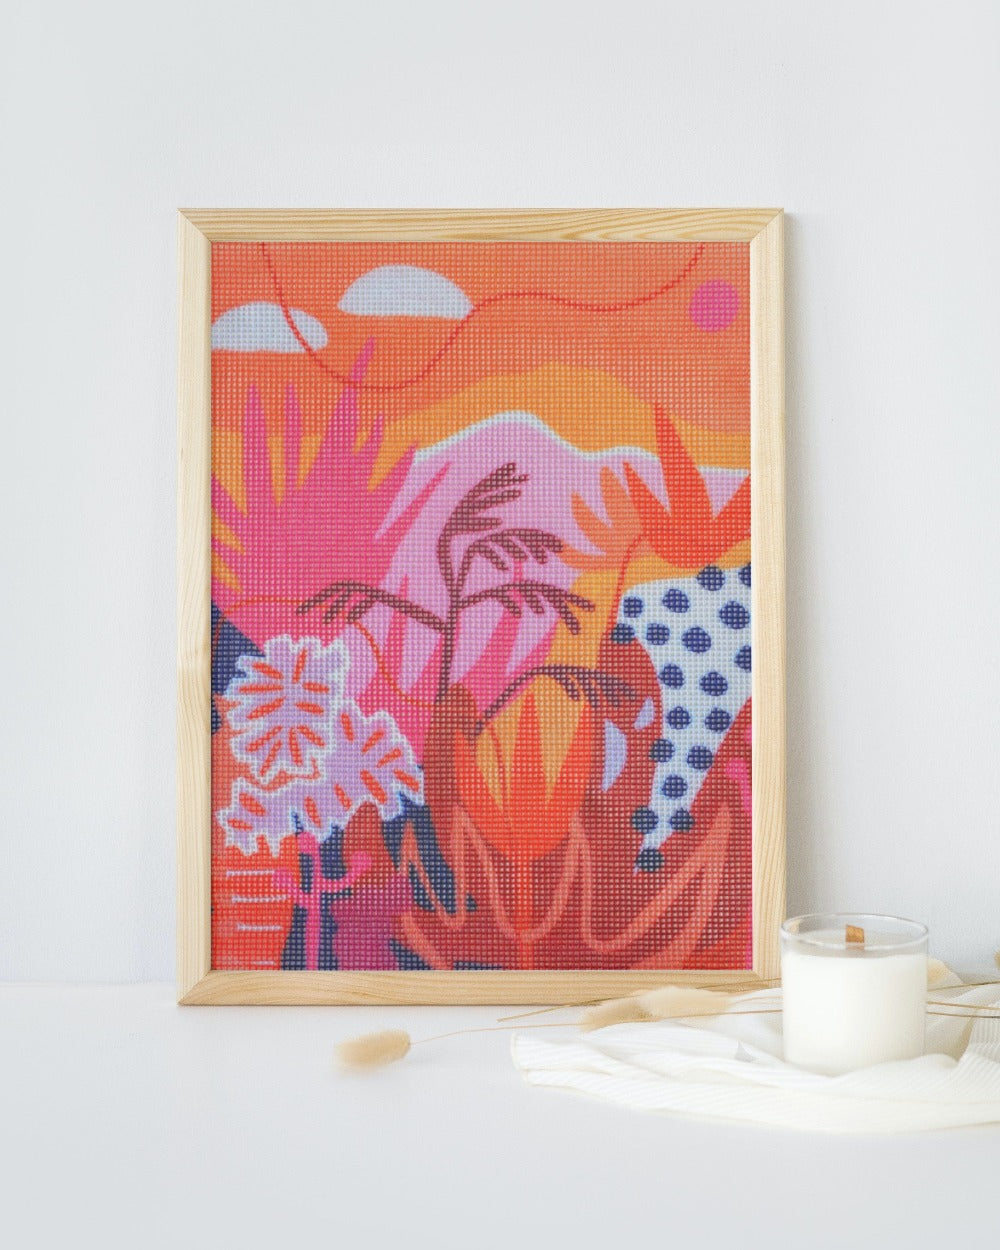 Highnoon abstract and modern design for a needlepoint kit by Unwind Studio in collaboration with artist Ponnopozz. Needlepoint framed for home decor